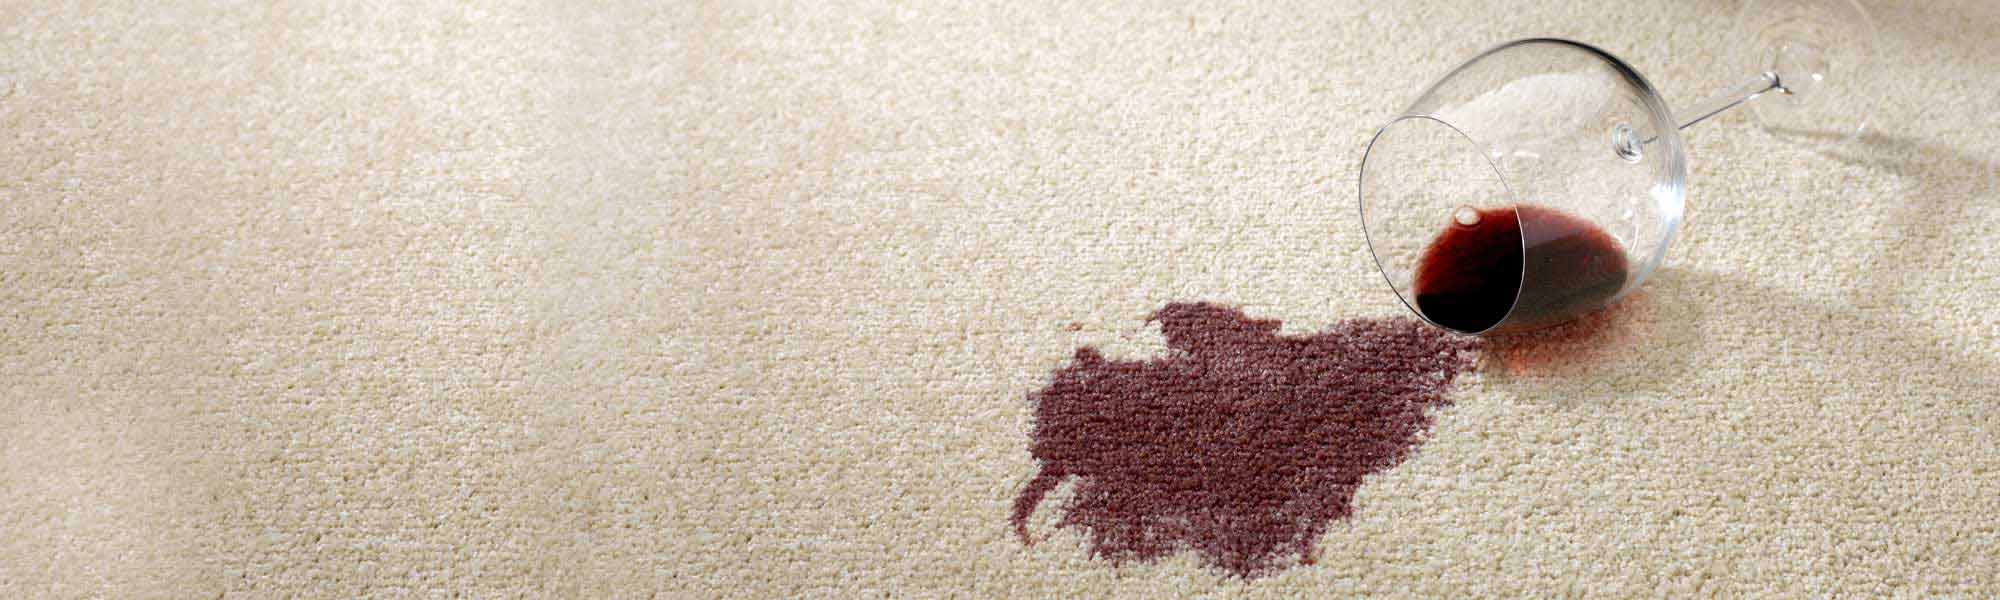 Professional Stain Removal Service by Chem-Dry of Mount Vernon in Mount Vernon WA.